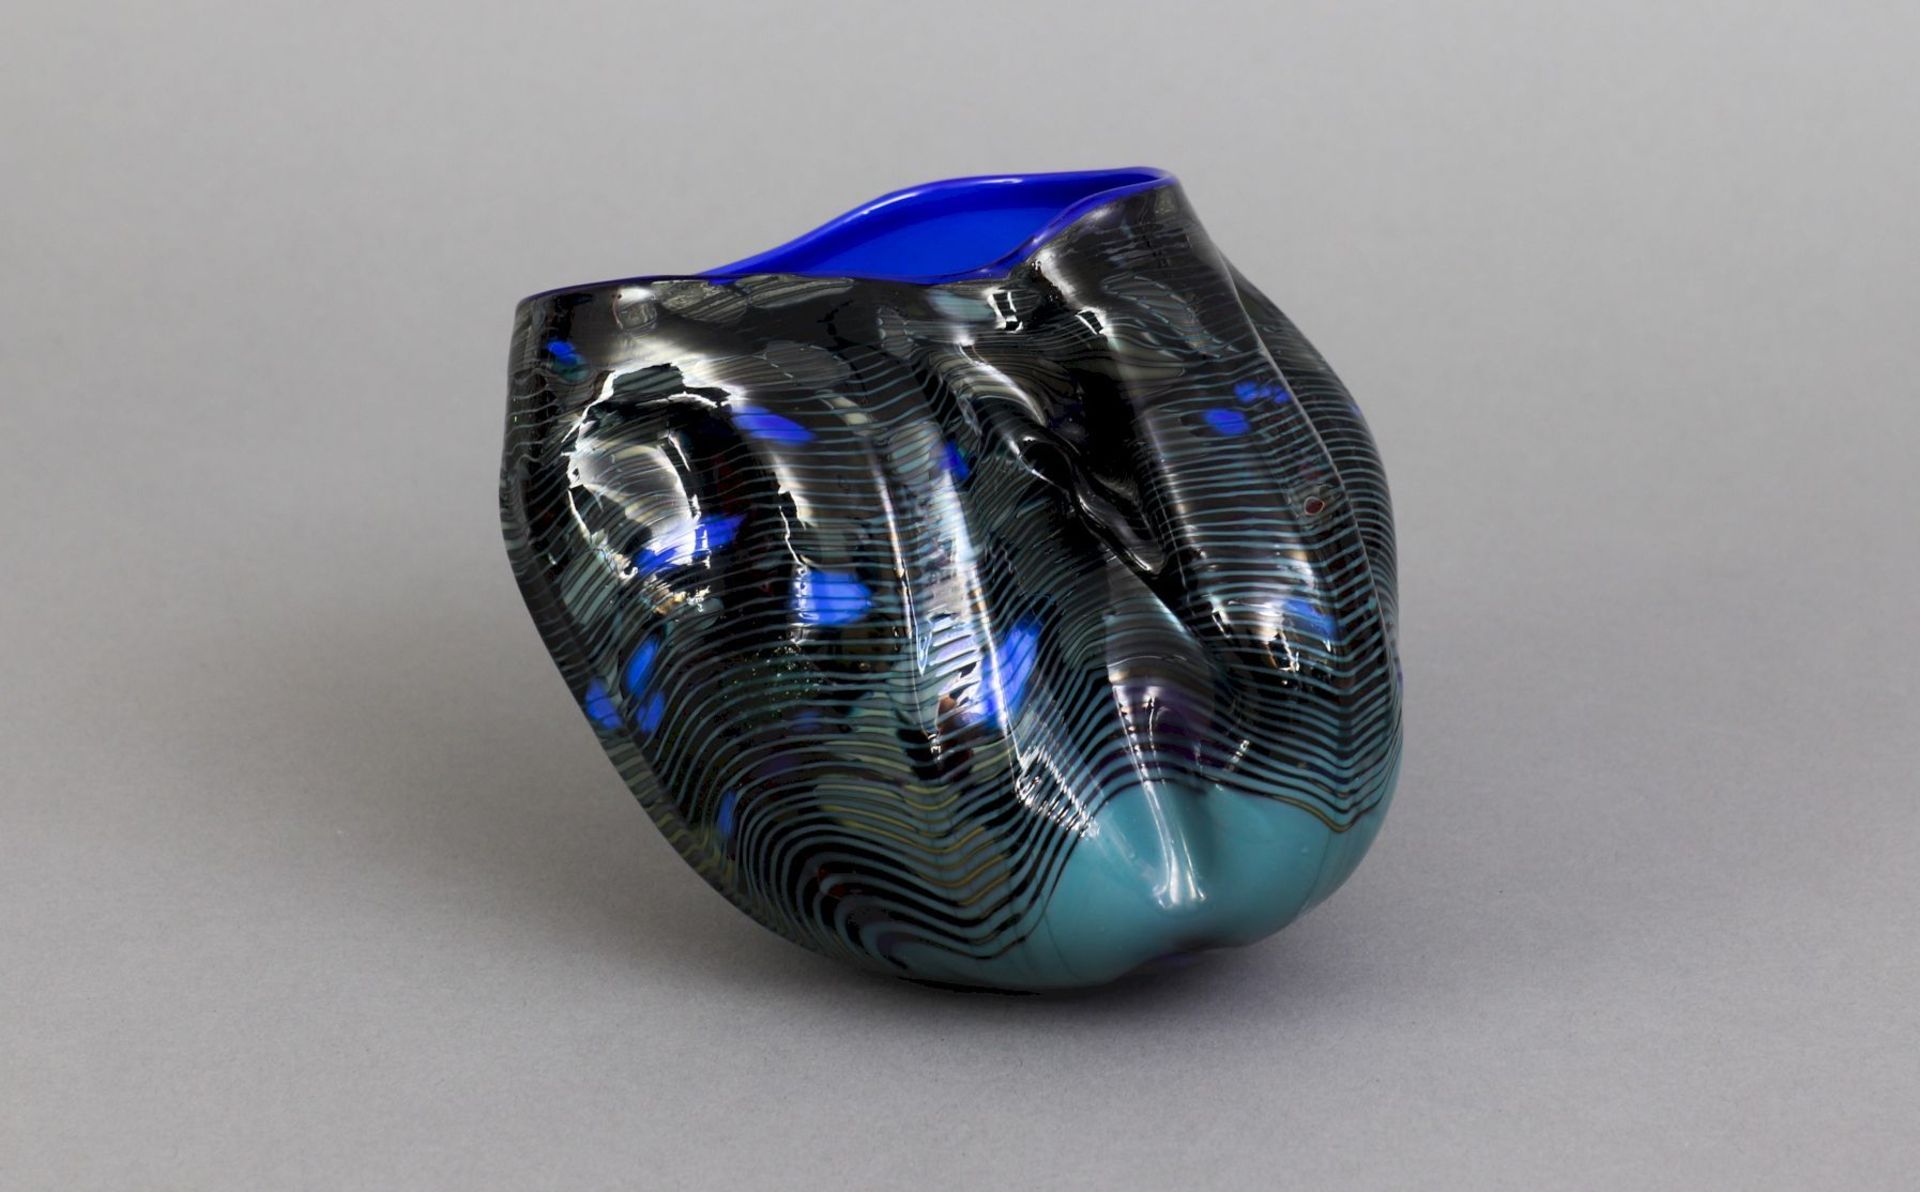 Dale Patrick CHIHULY (1941), Glasschale ¨Blue Macchia¨ - Image 2 of 5